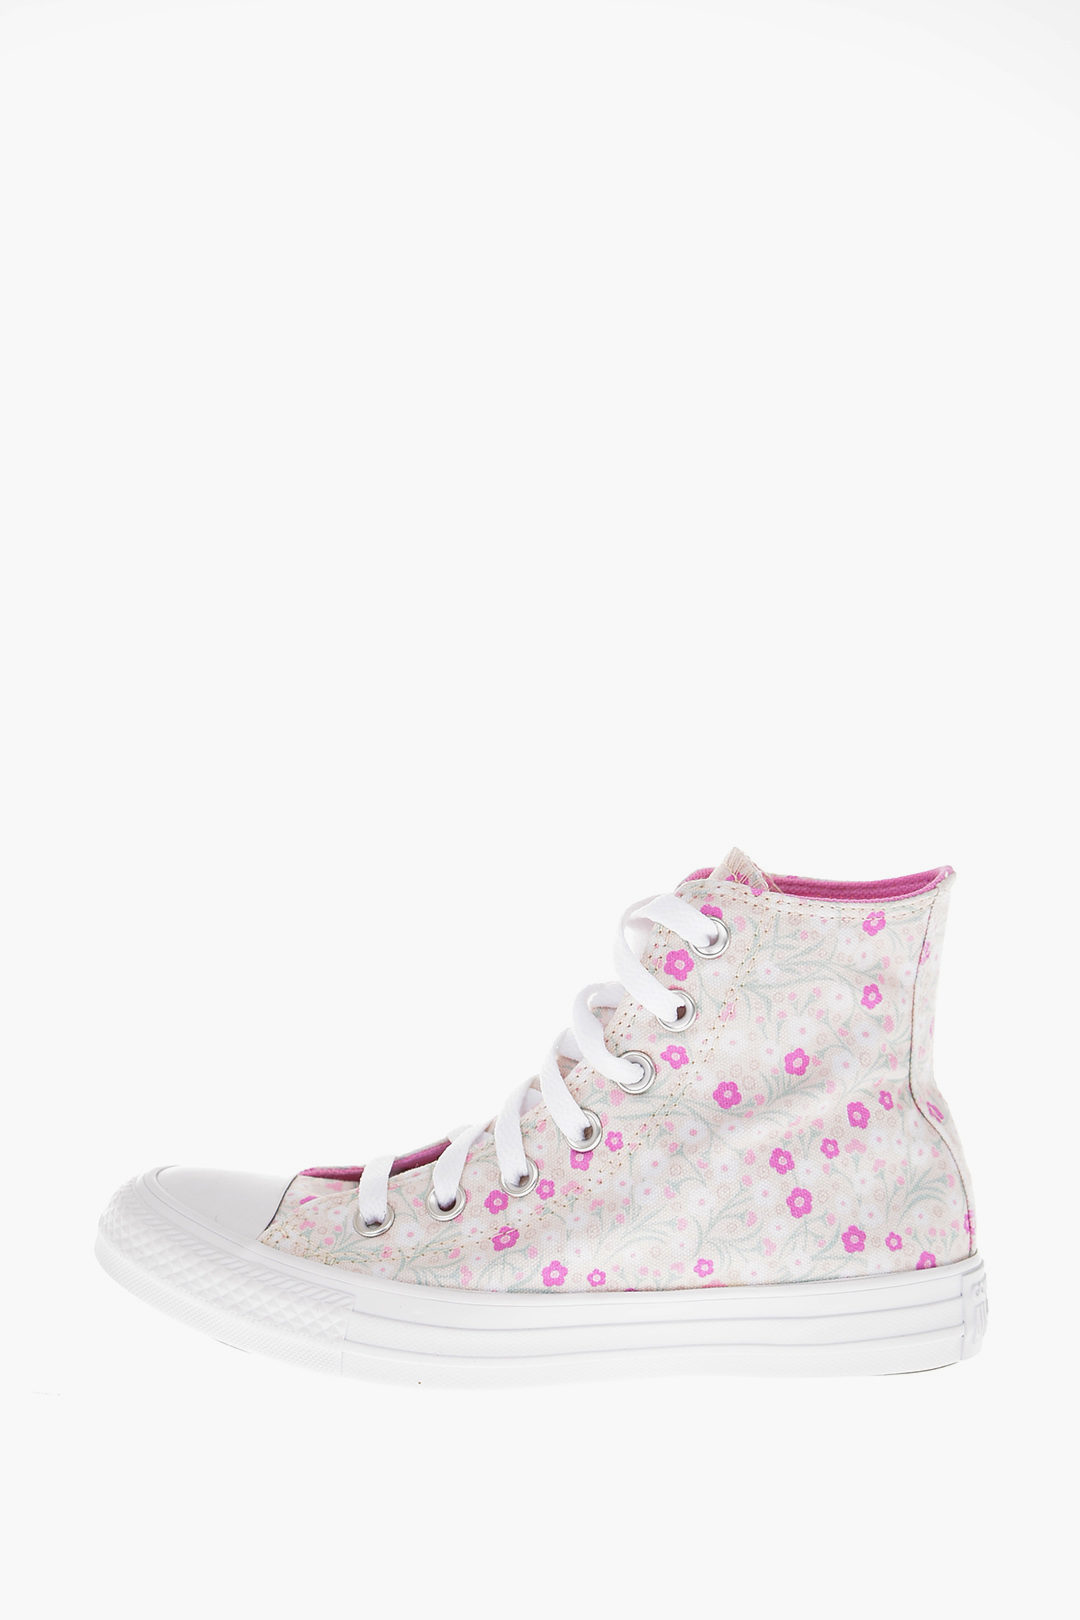 women's converse chuck taylor all star floral high top sneakers